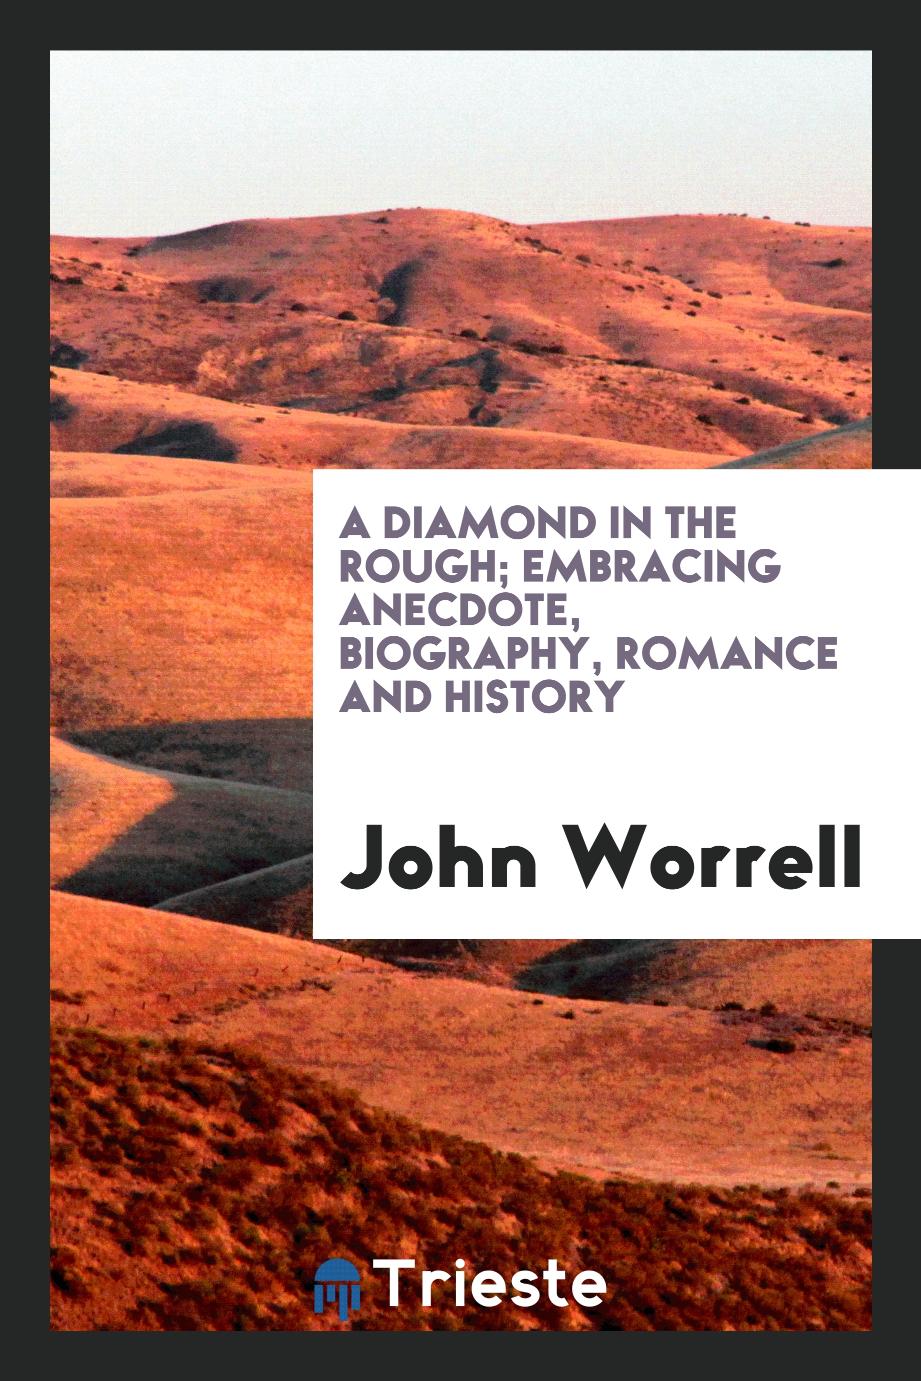 A diamond in the rough; embracing anecdote, biography, romance and history